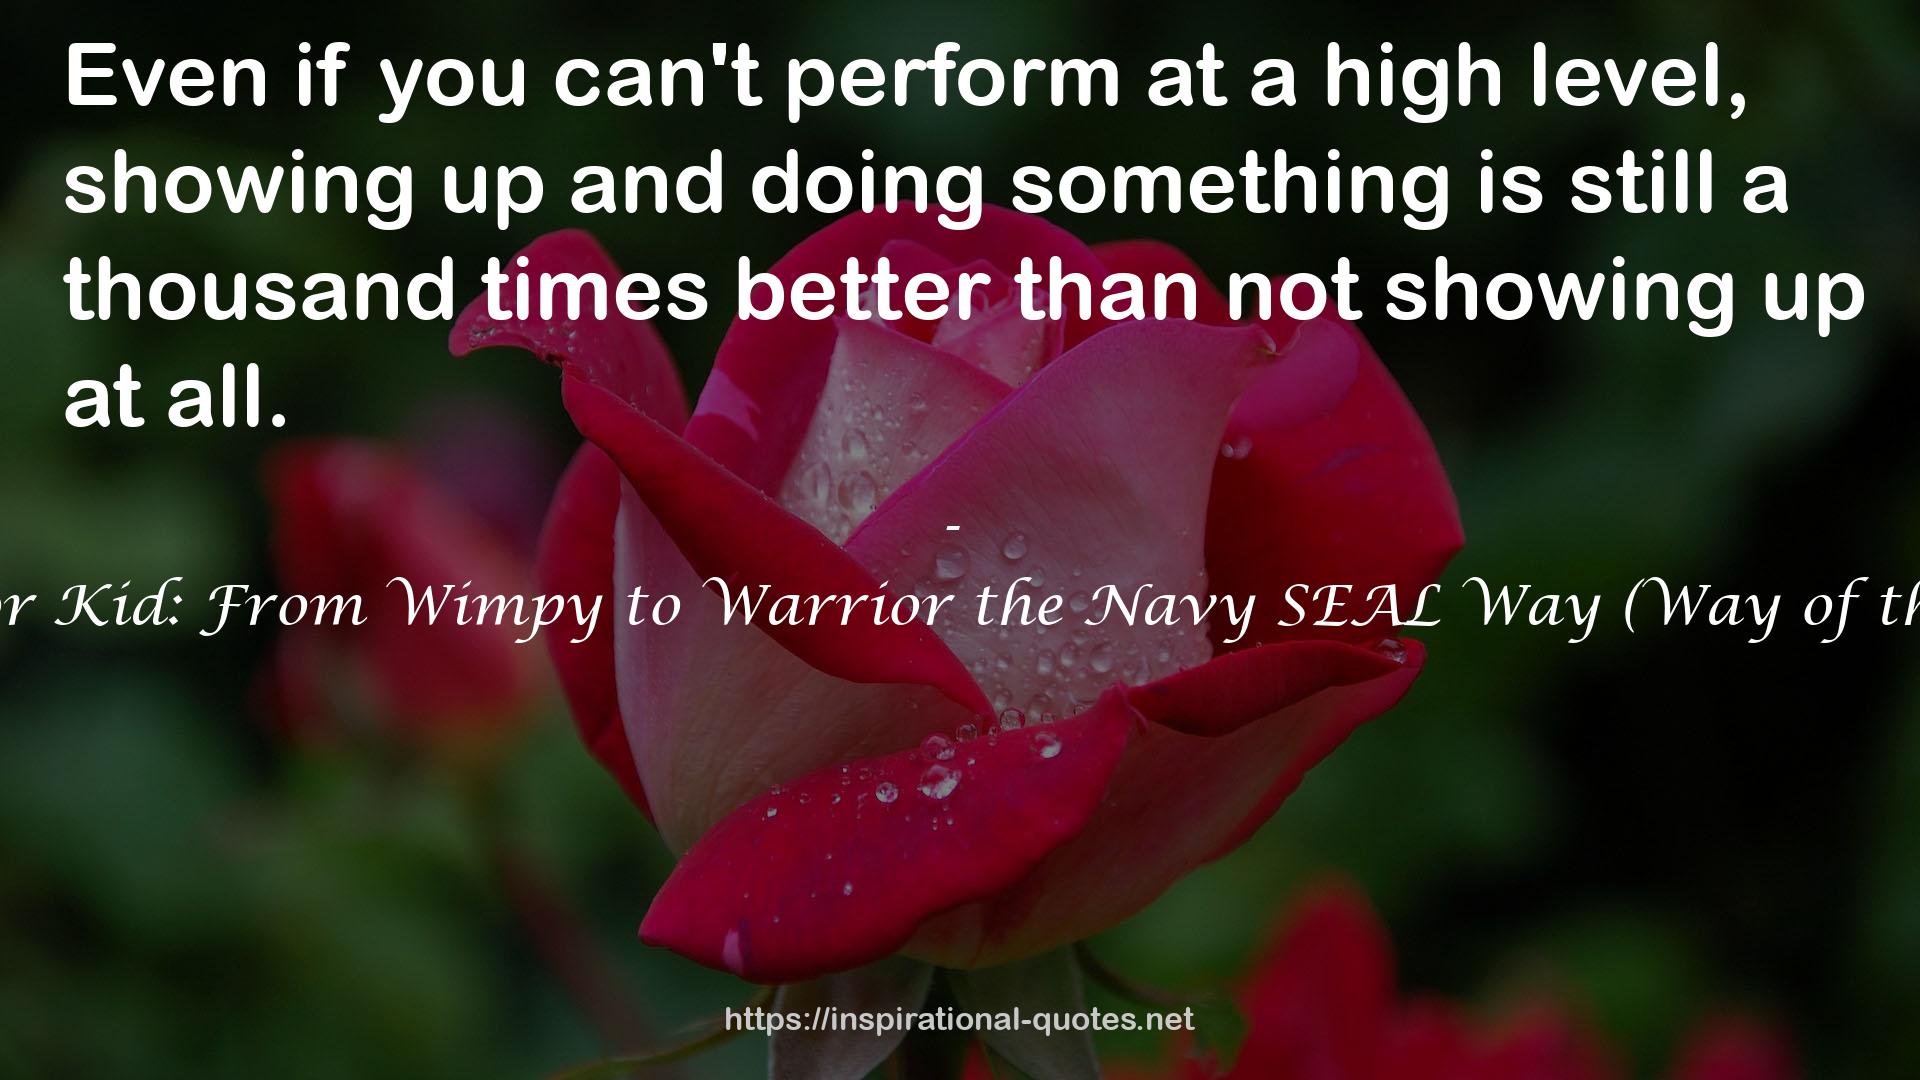 Way of the Warrior Kid: From Wimpy to Warrior the Navy SEAL Way (Way of the Warrior Kid, #1) QUOTES